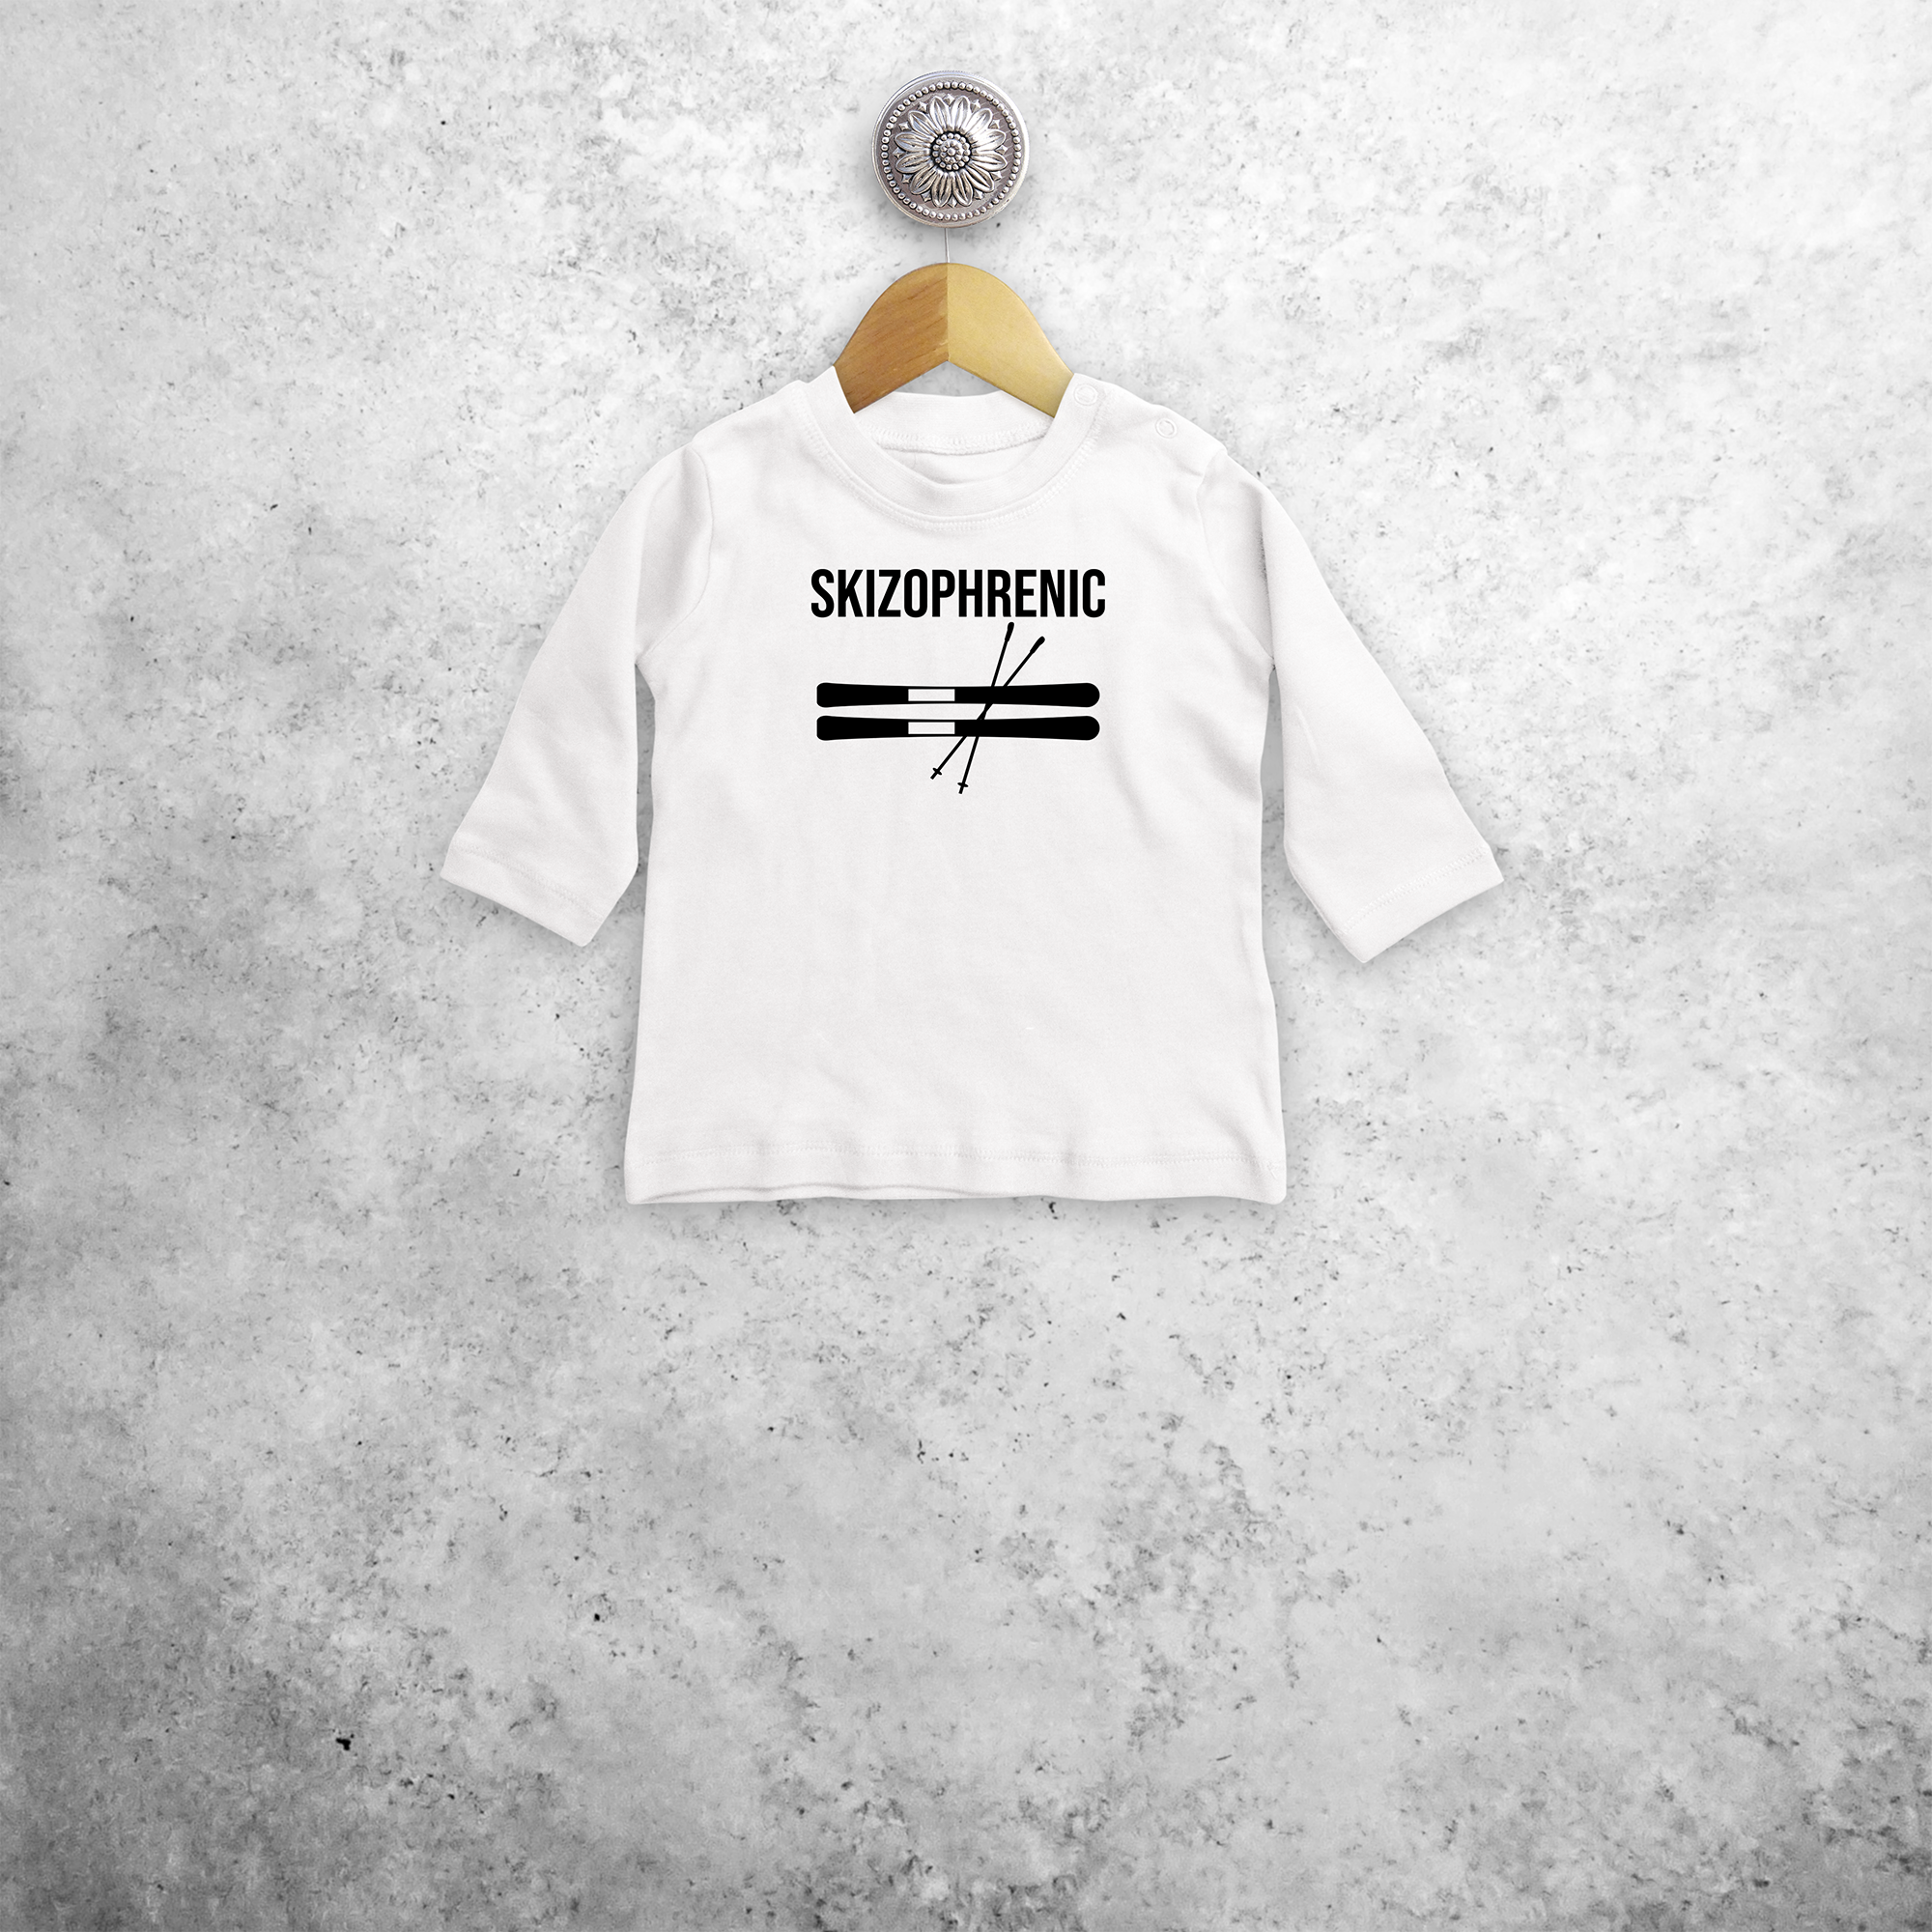 Baby or toddler shirt with long sleeves, with ‘Skizophrenic’ print by KMLeon.